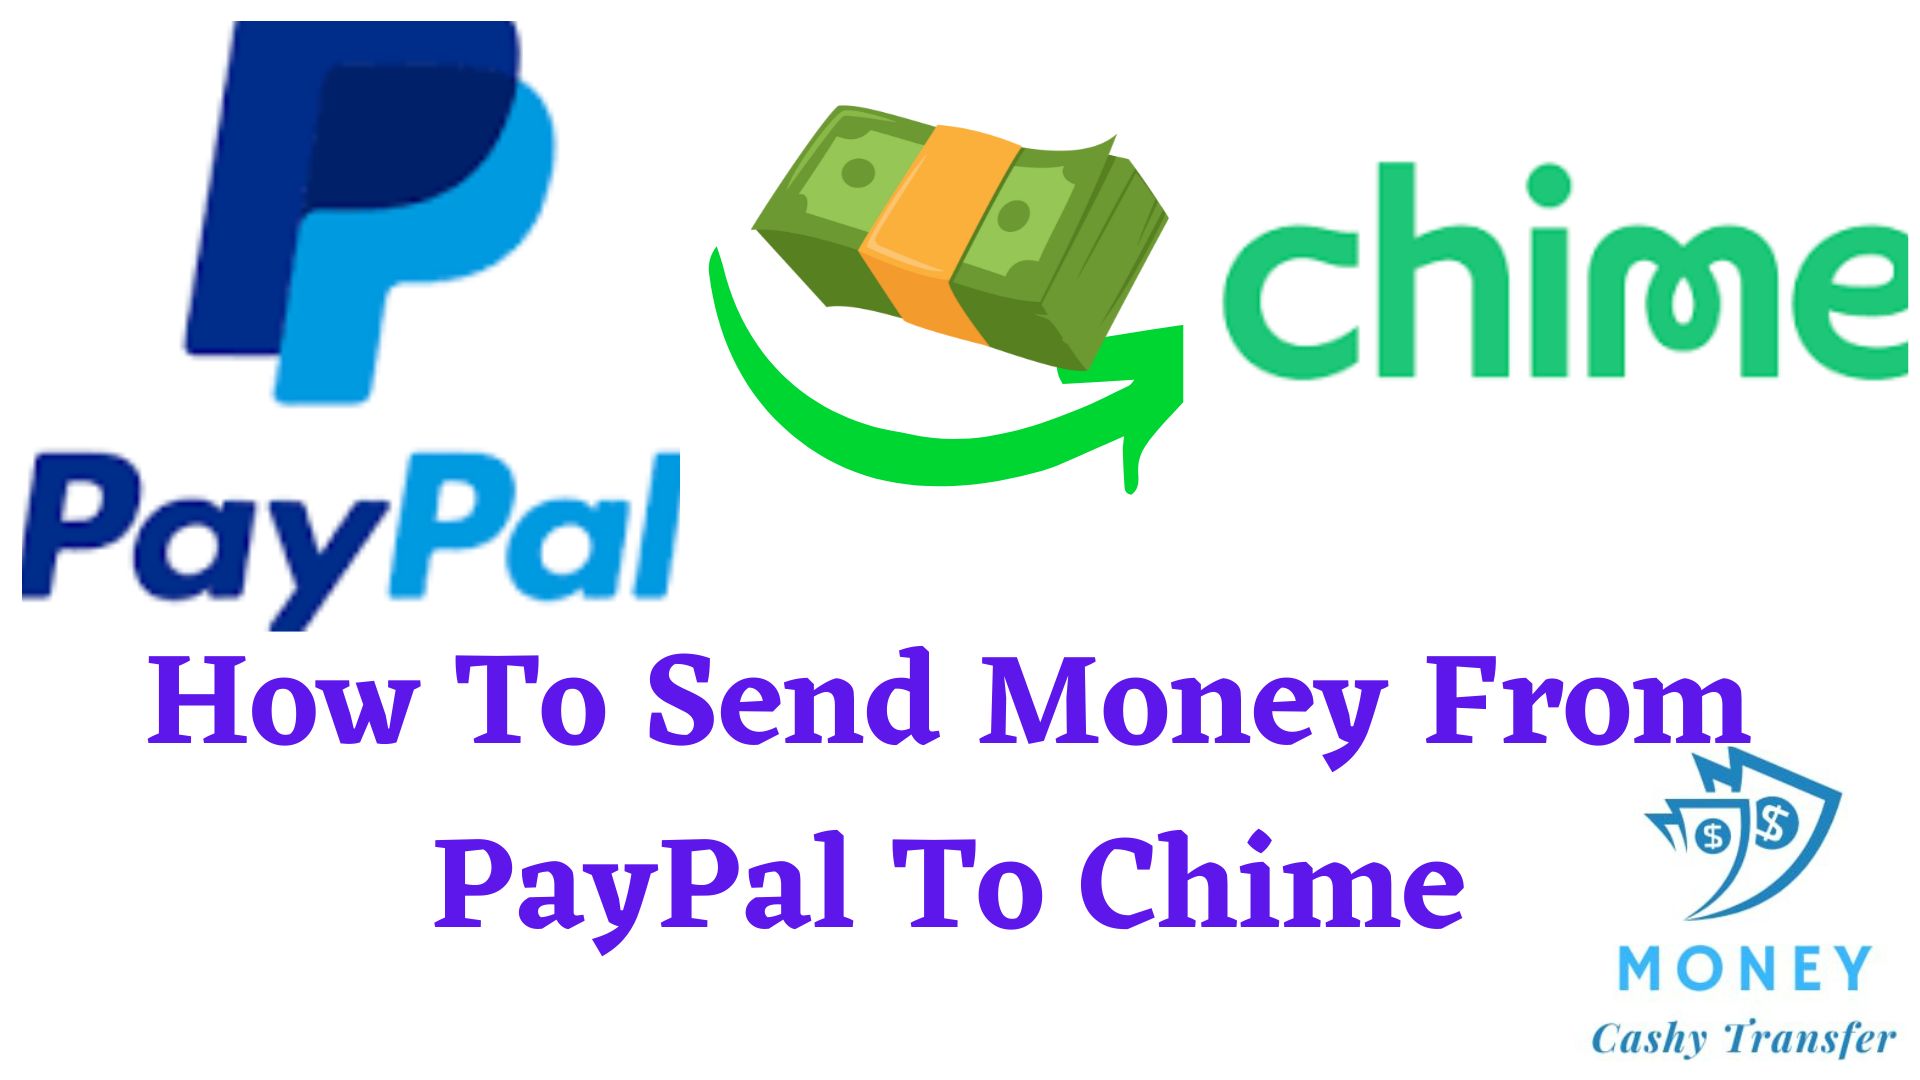 Send Money From PayPal To Chime